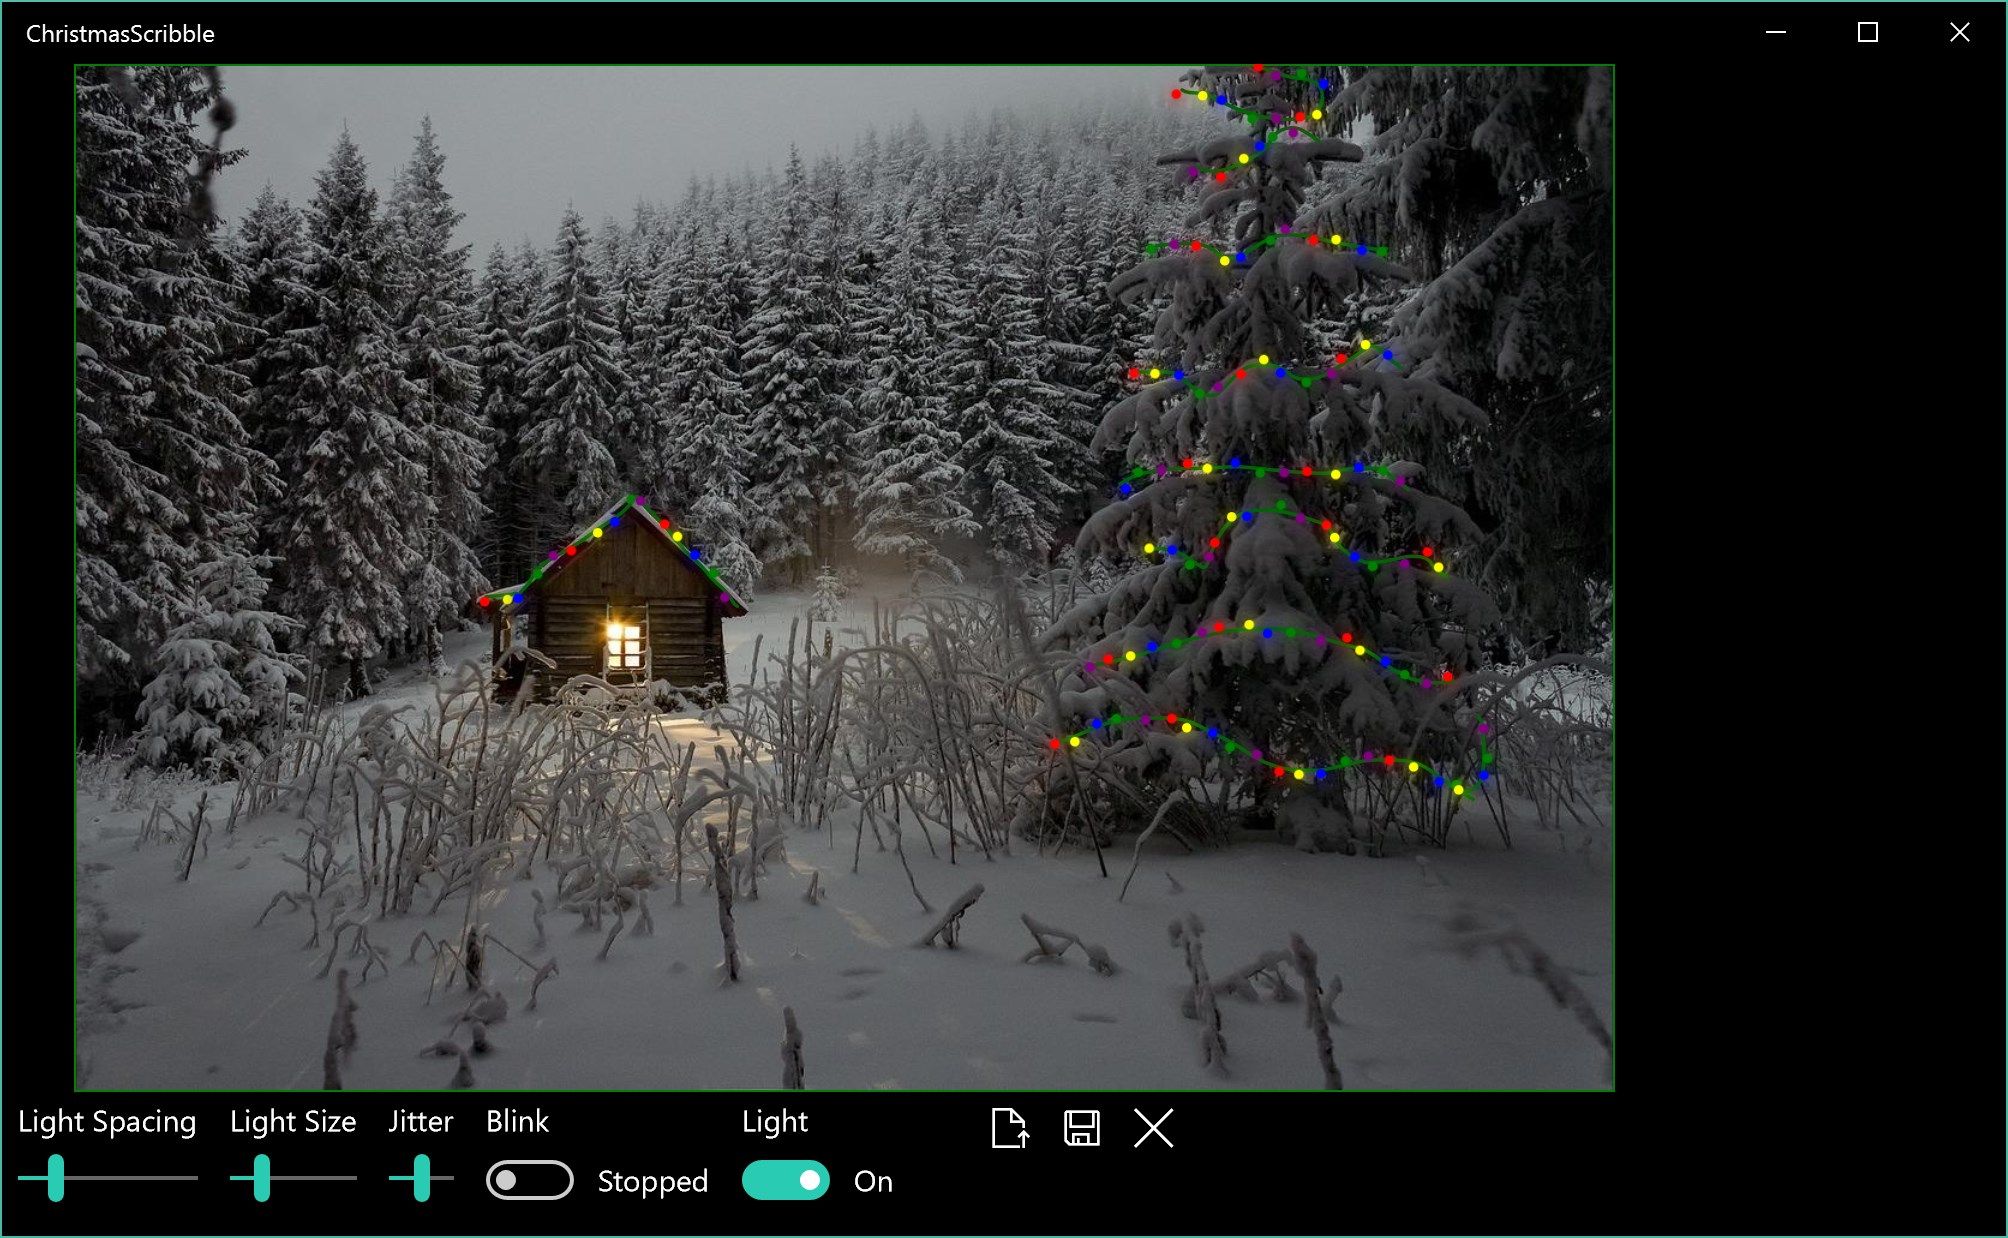 Christmas lights added to a snowy cottage scene.